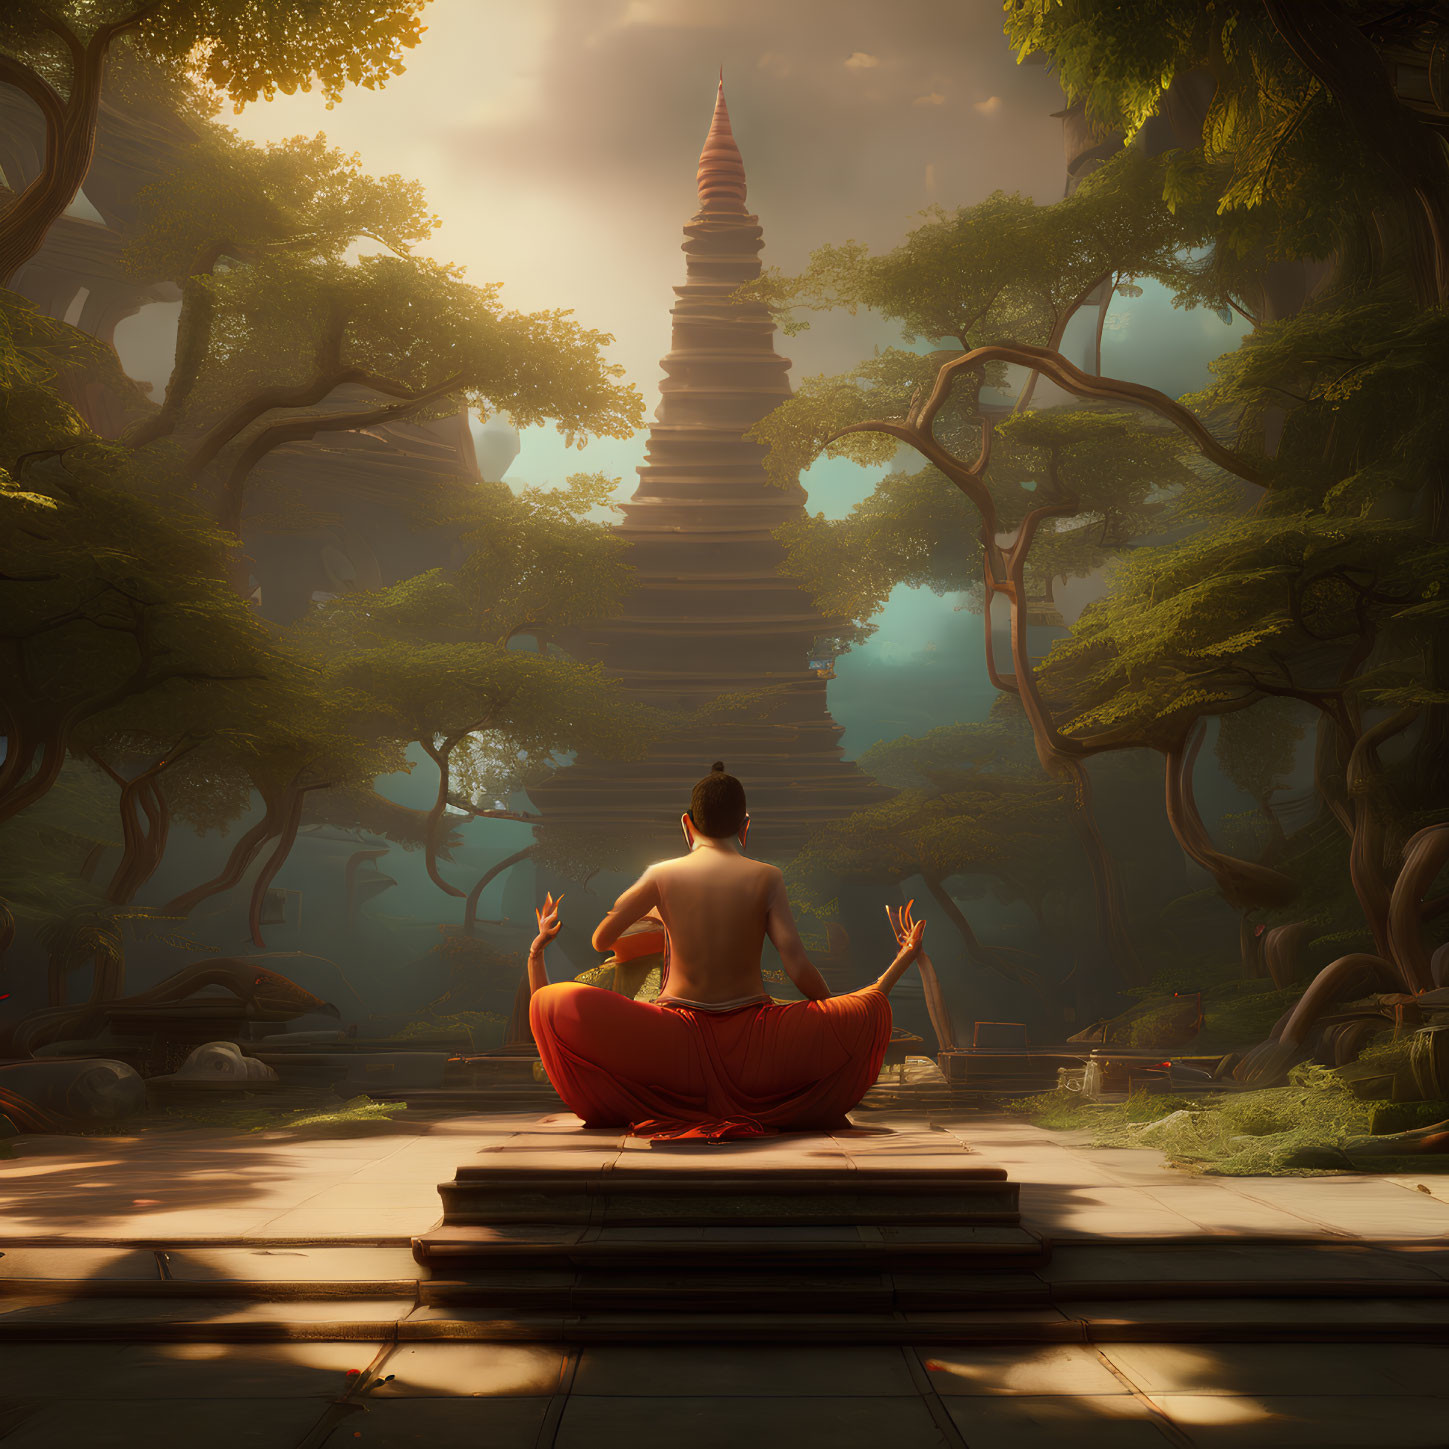 Person meditating in red attire near ancient pagoda in serene forest.